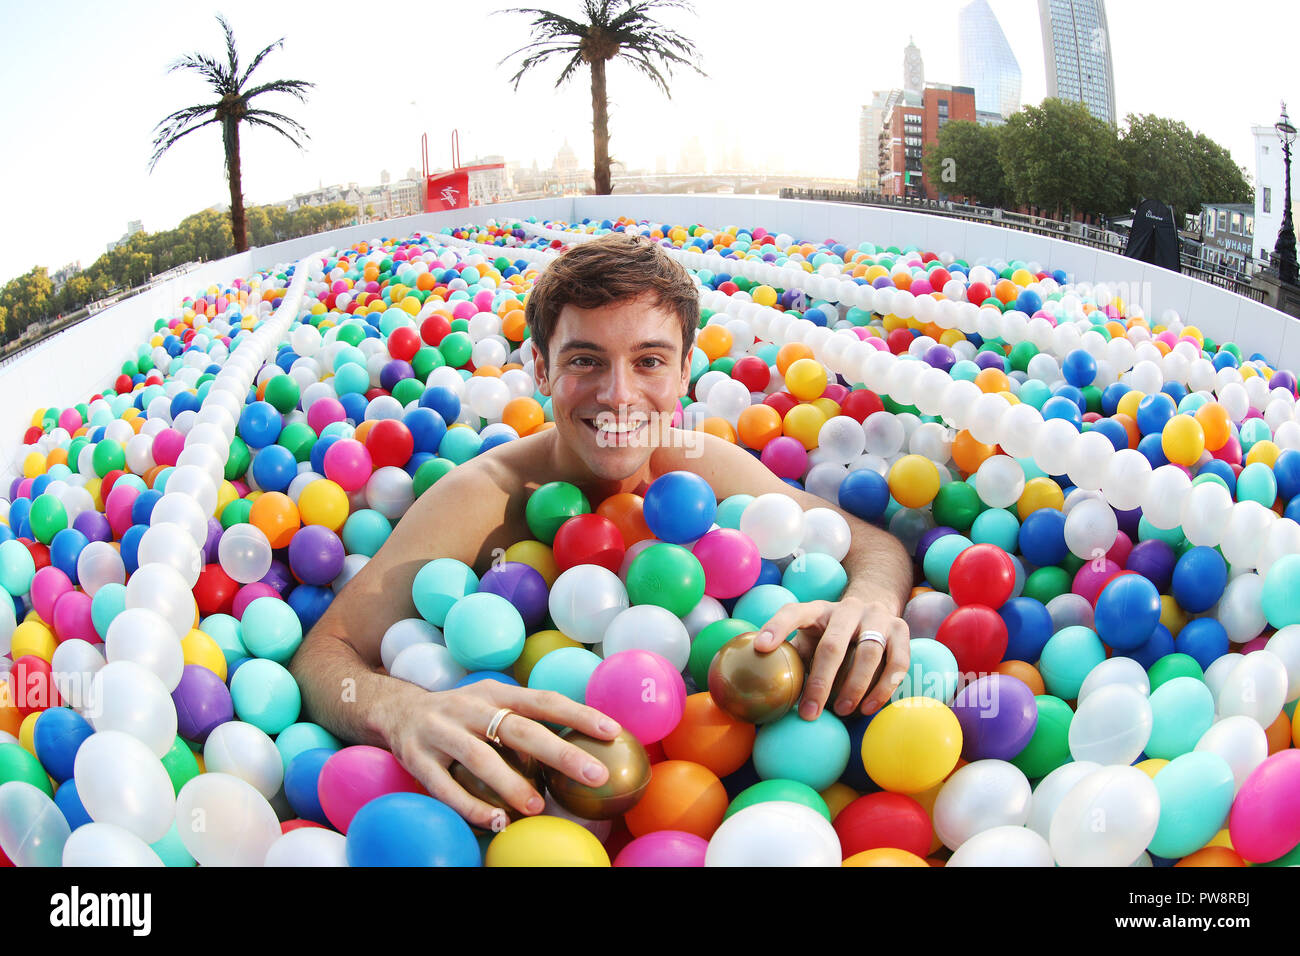 Tom Daley makes a splash in a giant outdoor ball-pit on London's Southbank.  Virgin Holidays is encouraging people to see the world as their playground  and dive into the 140,000-strong ball pool,